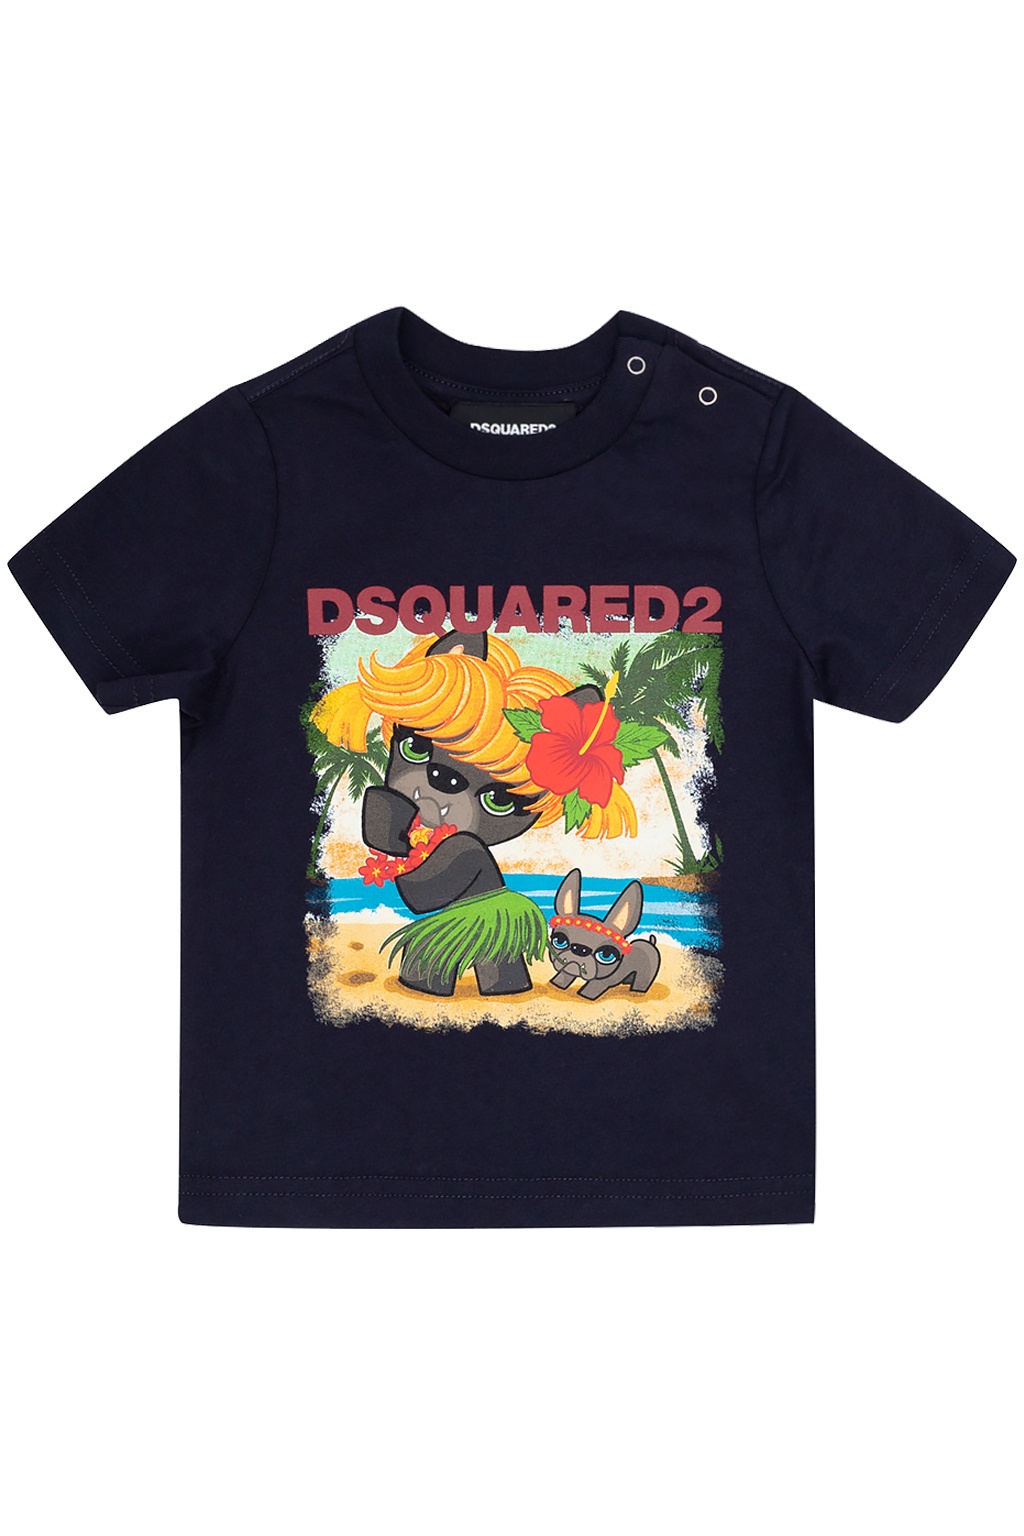 dsquared kids top